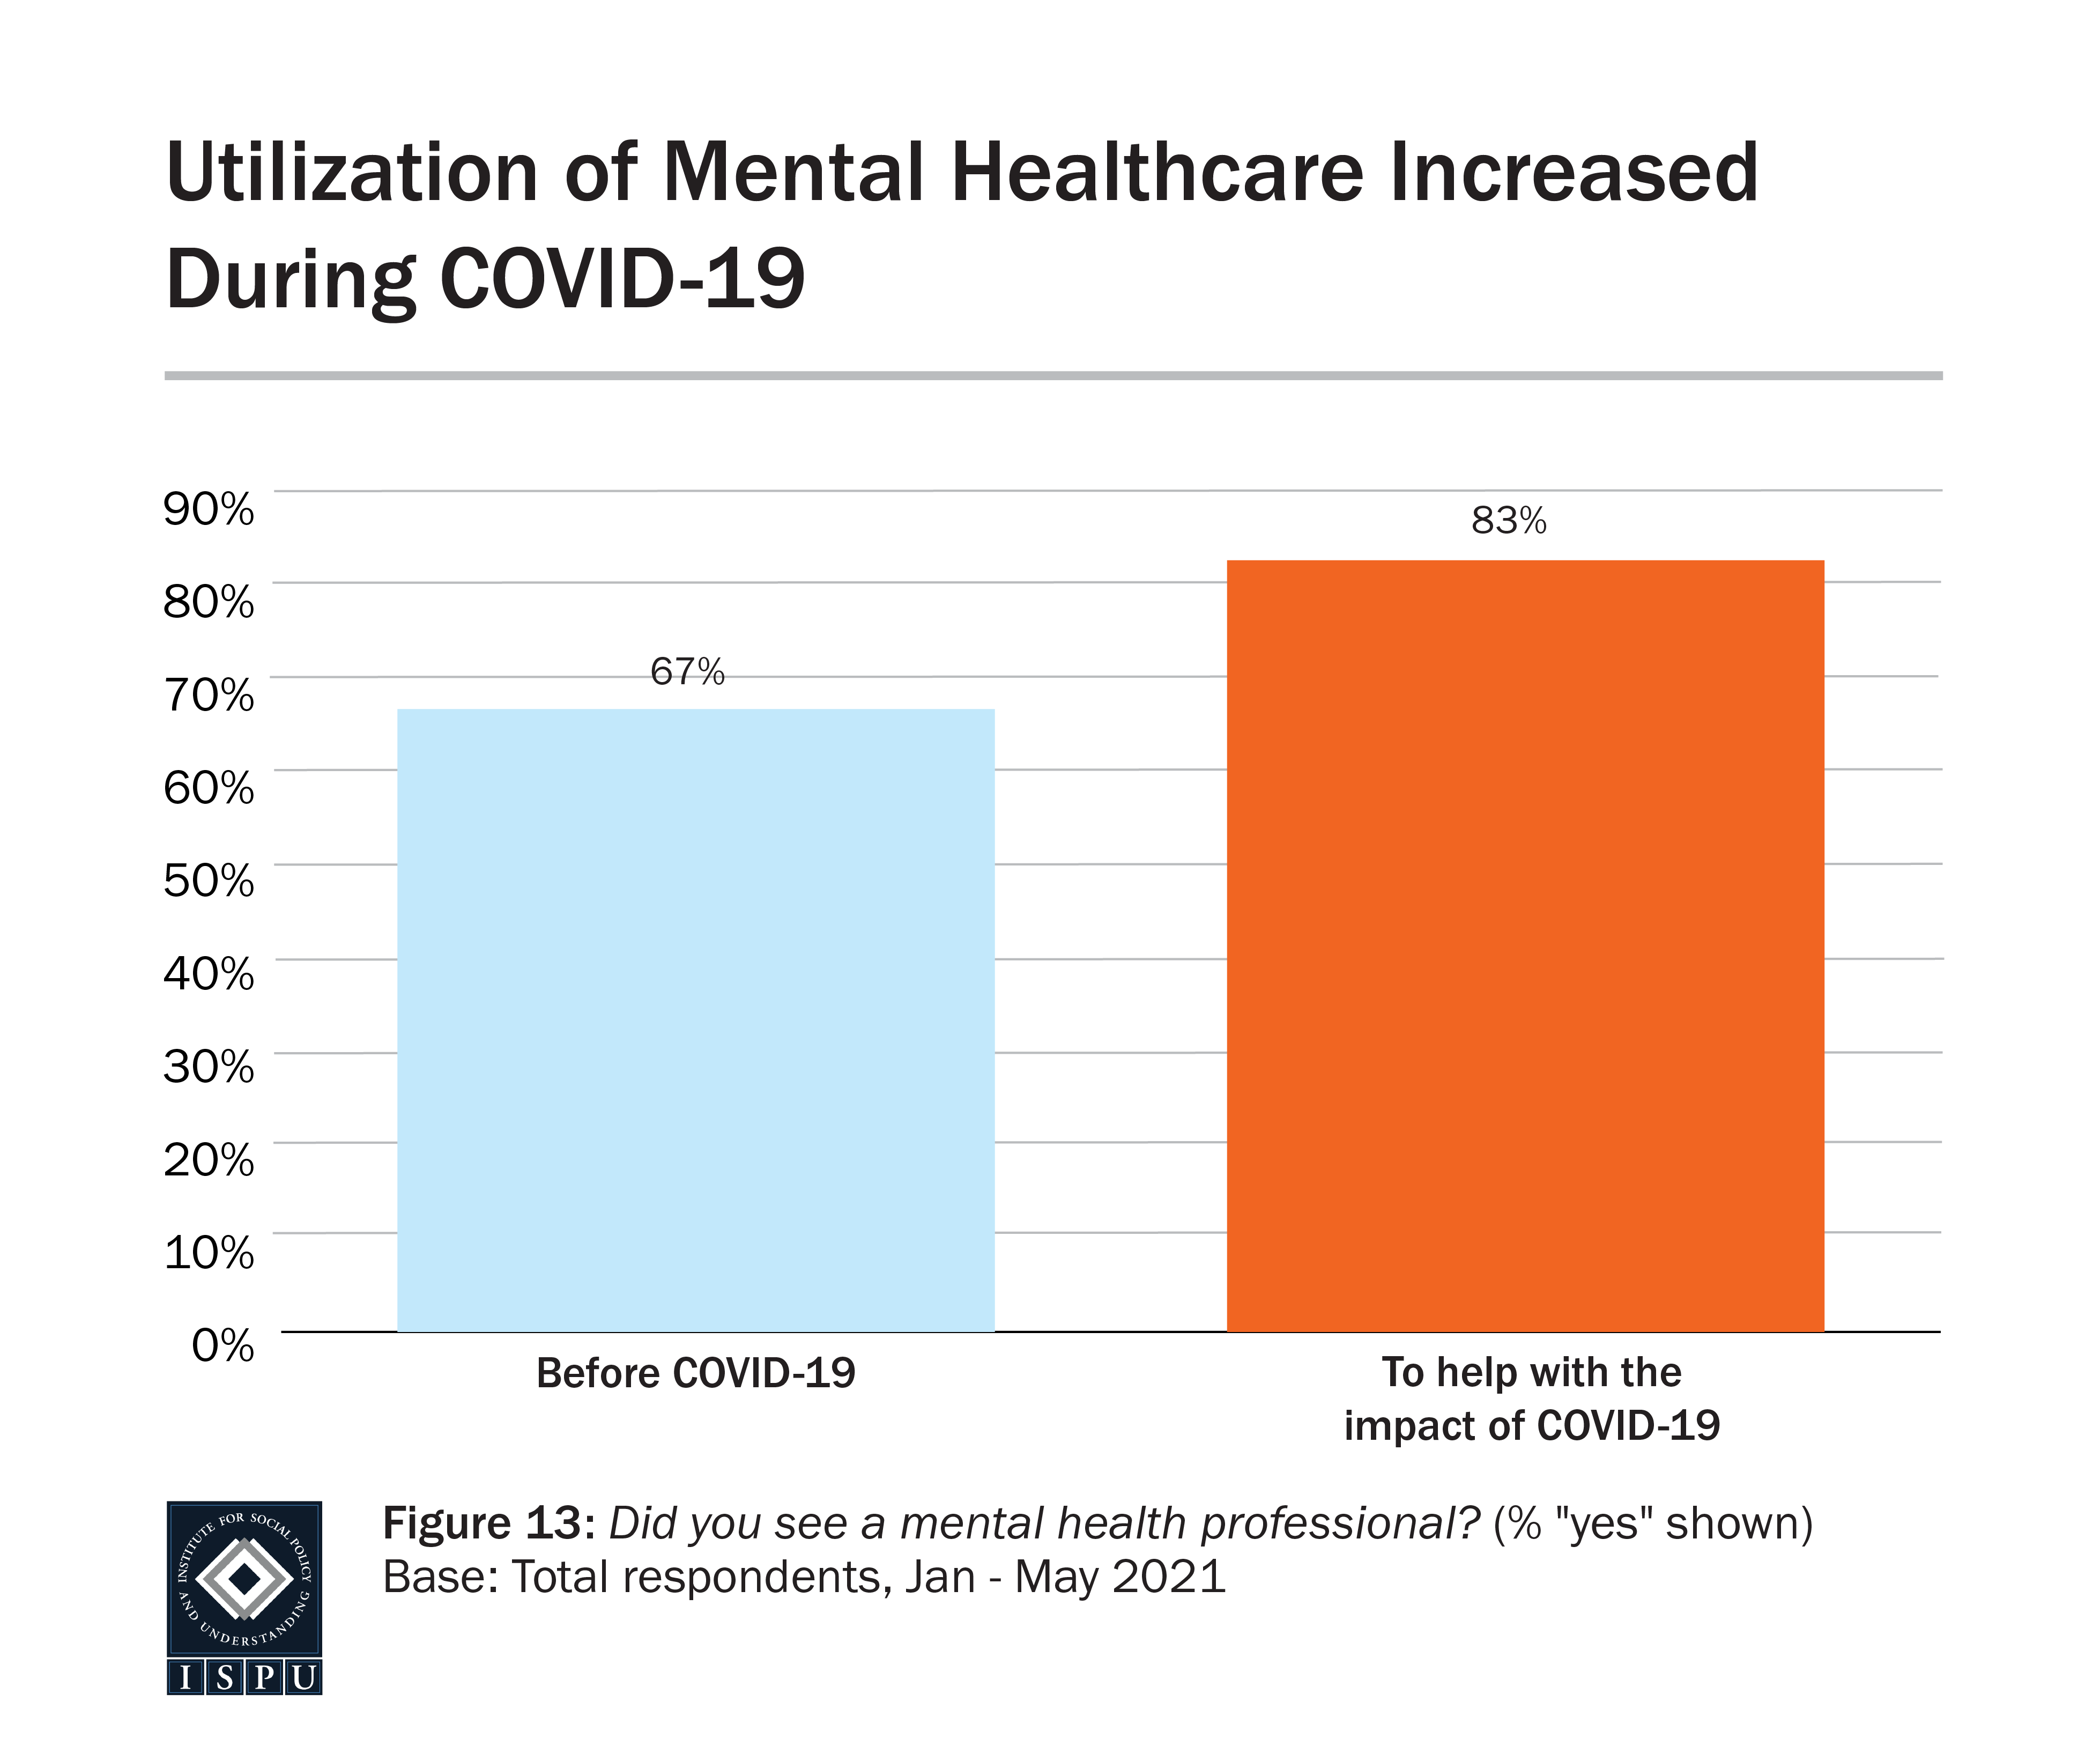 Graph displaying: bar graph showing mental healthcare increased during COVID-19